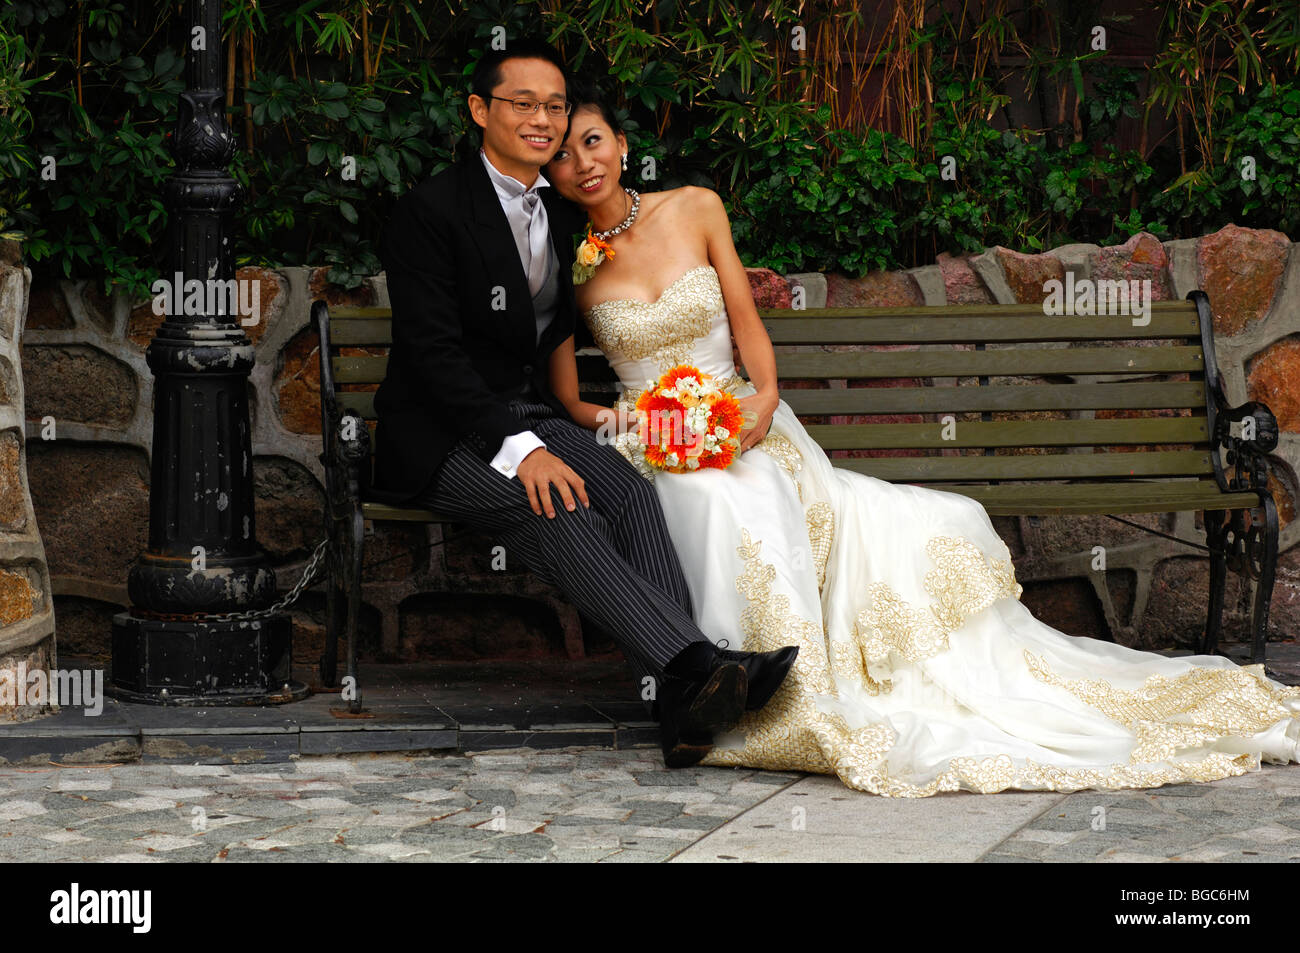 Chinese wedding couple in a long dress and a dark suit sitting on a bench, Hong Kong, China, Asia Stock Photo